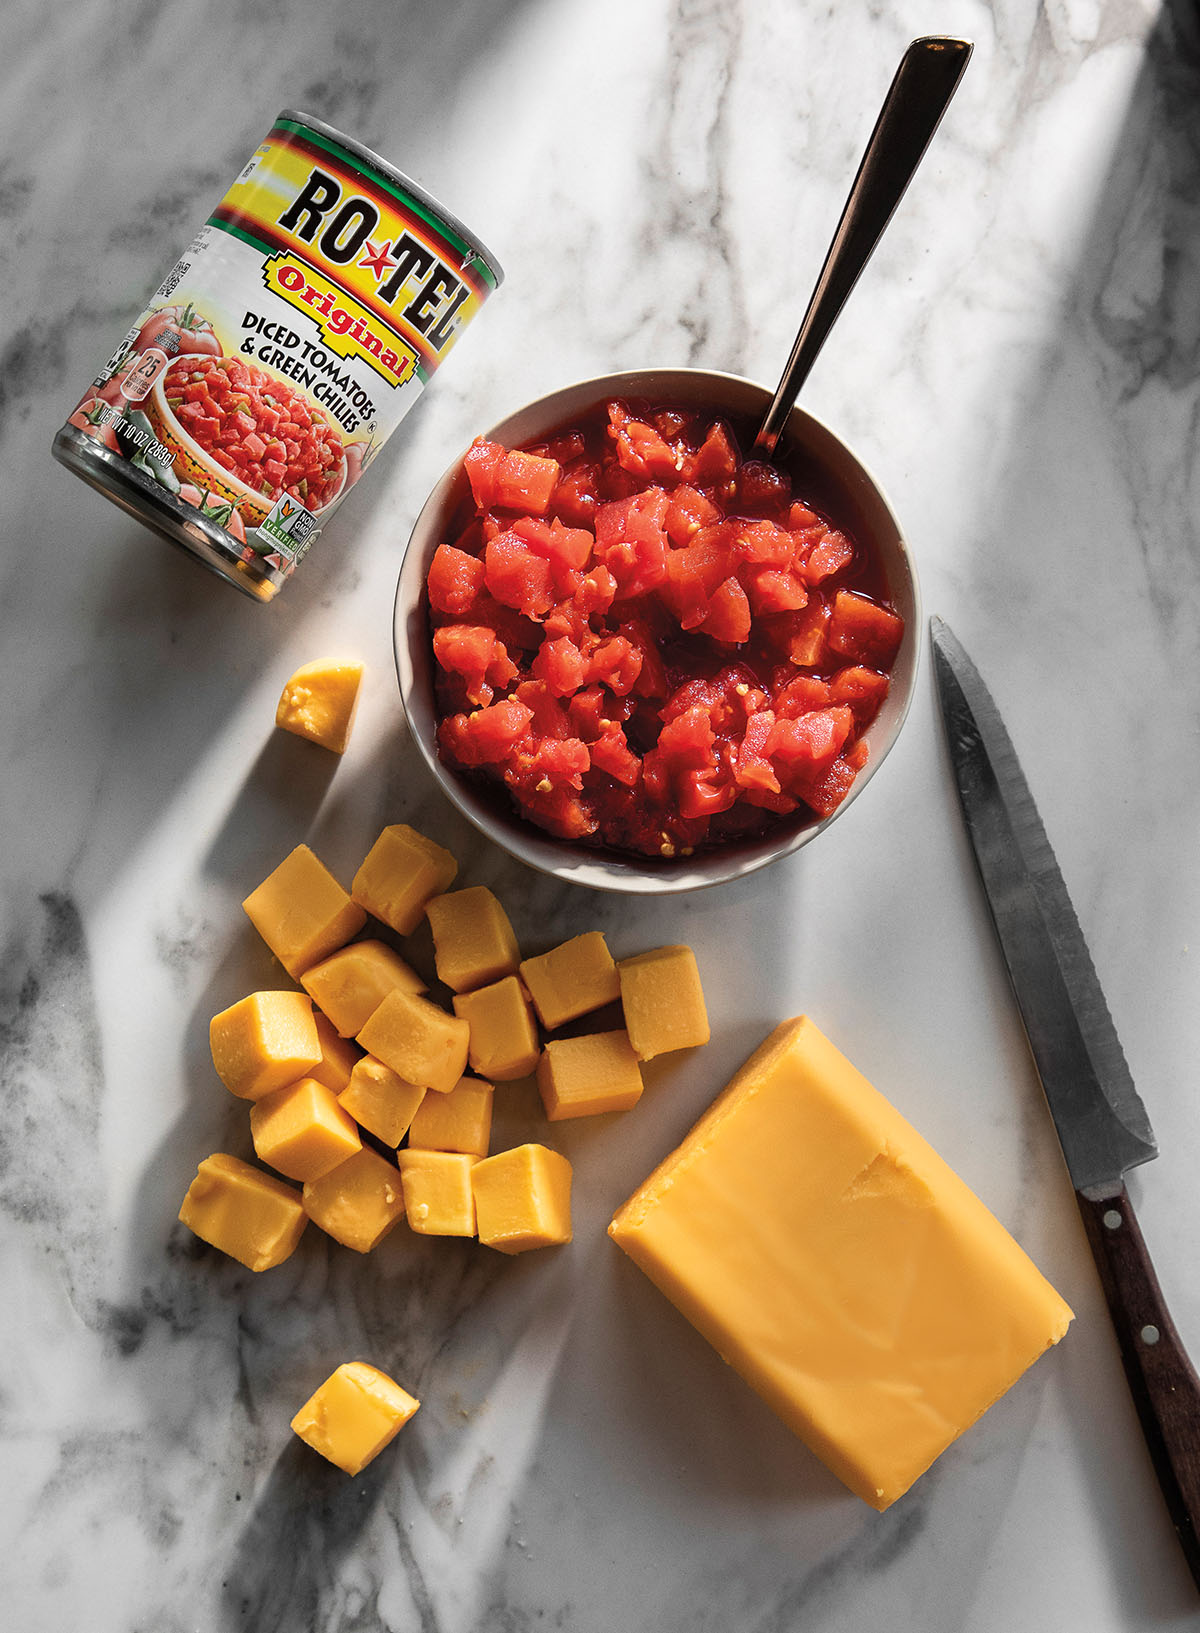 An overhead view of a can of Ro-Tel, the can emptied into a dish, and cubes of Velveeta cheese